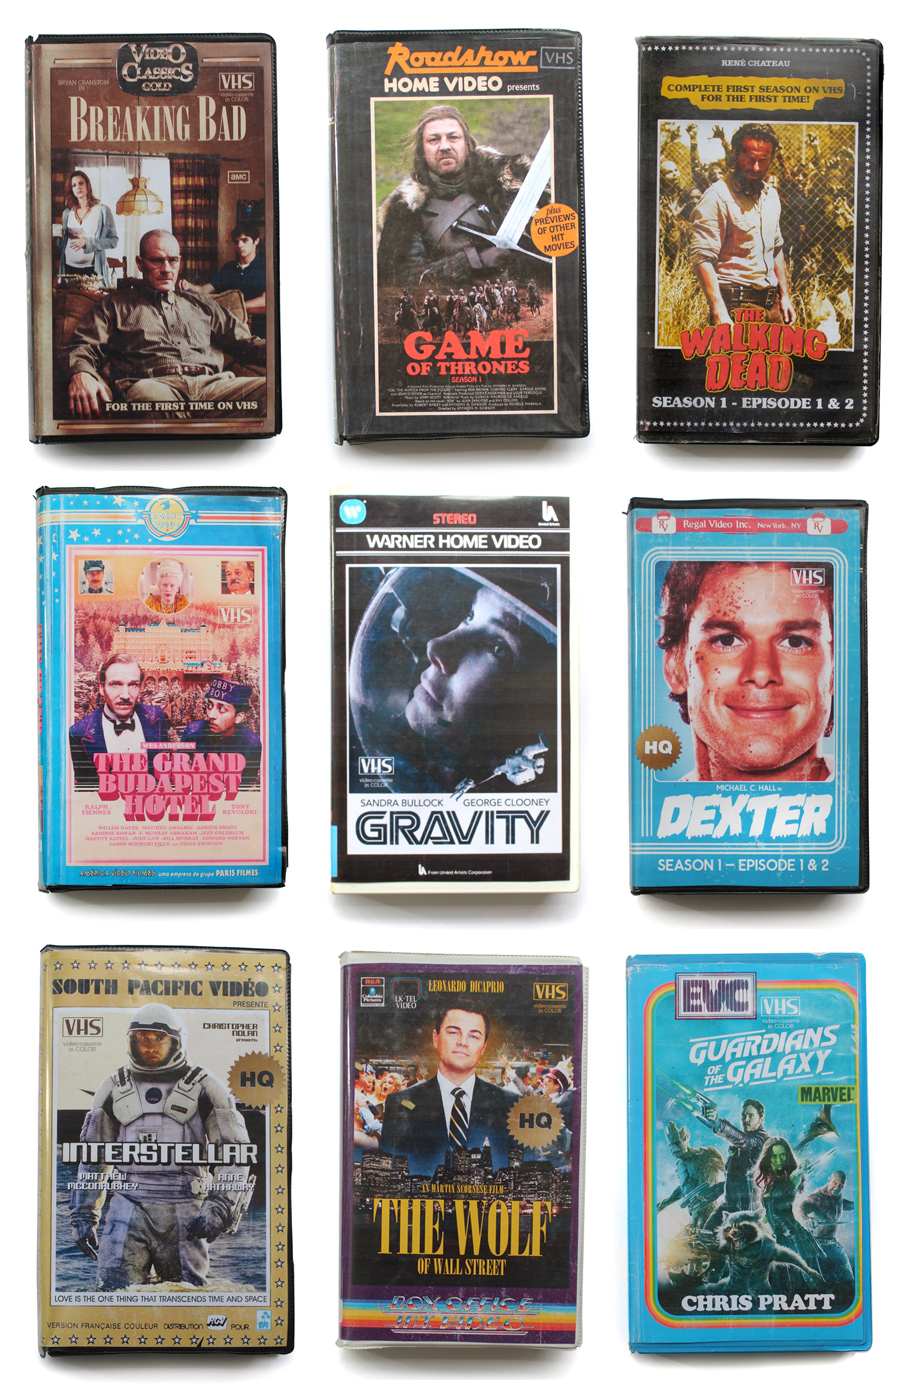 A Dude Made Fake VHS Covers For New Shows, And They’re So Good